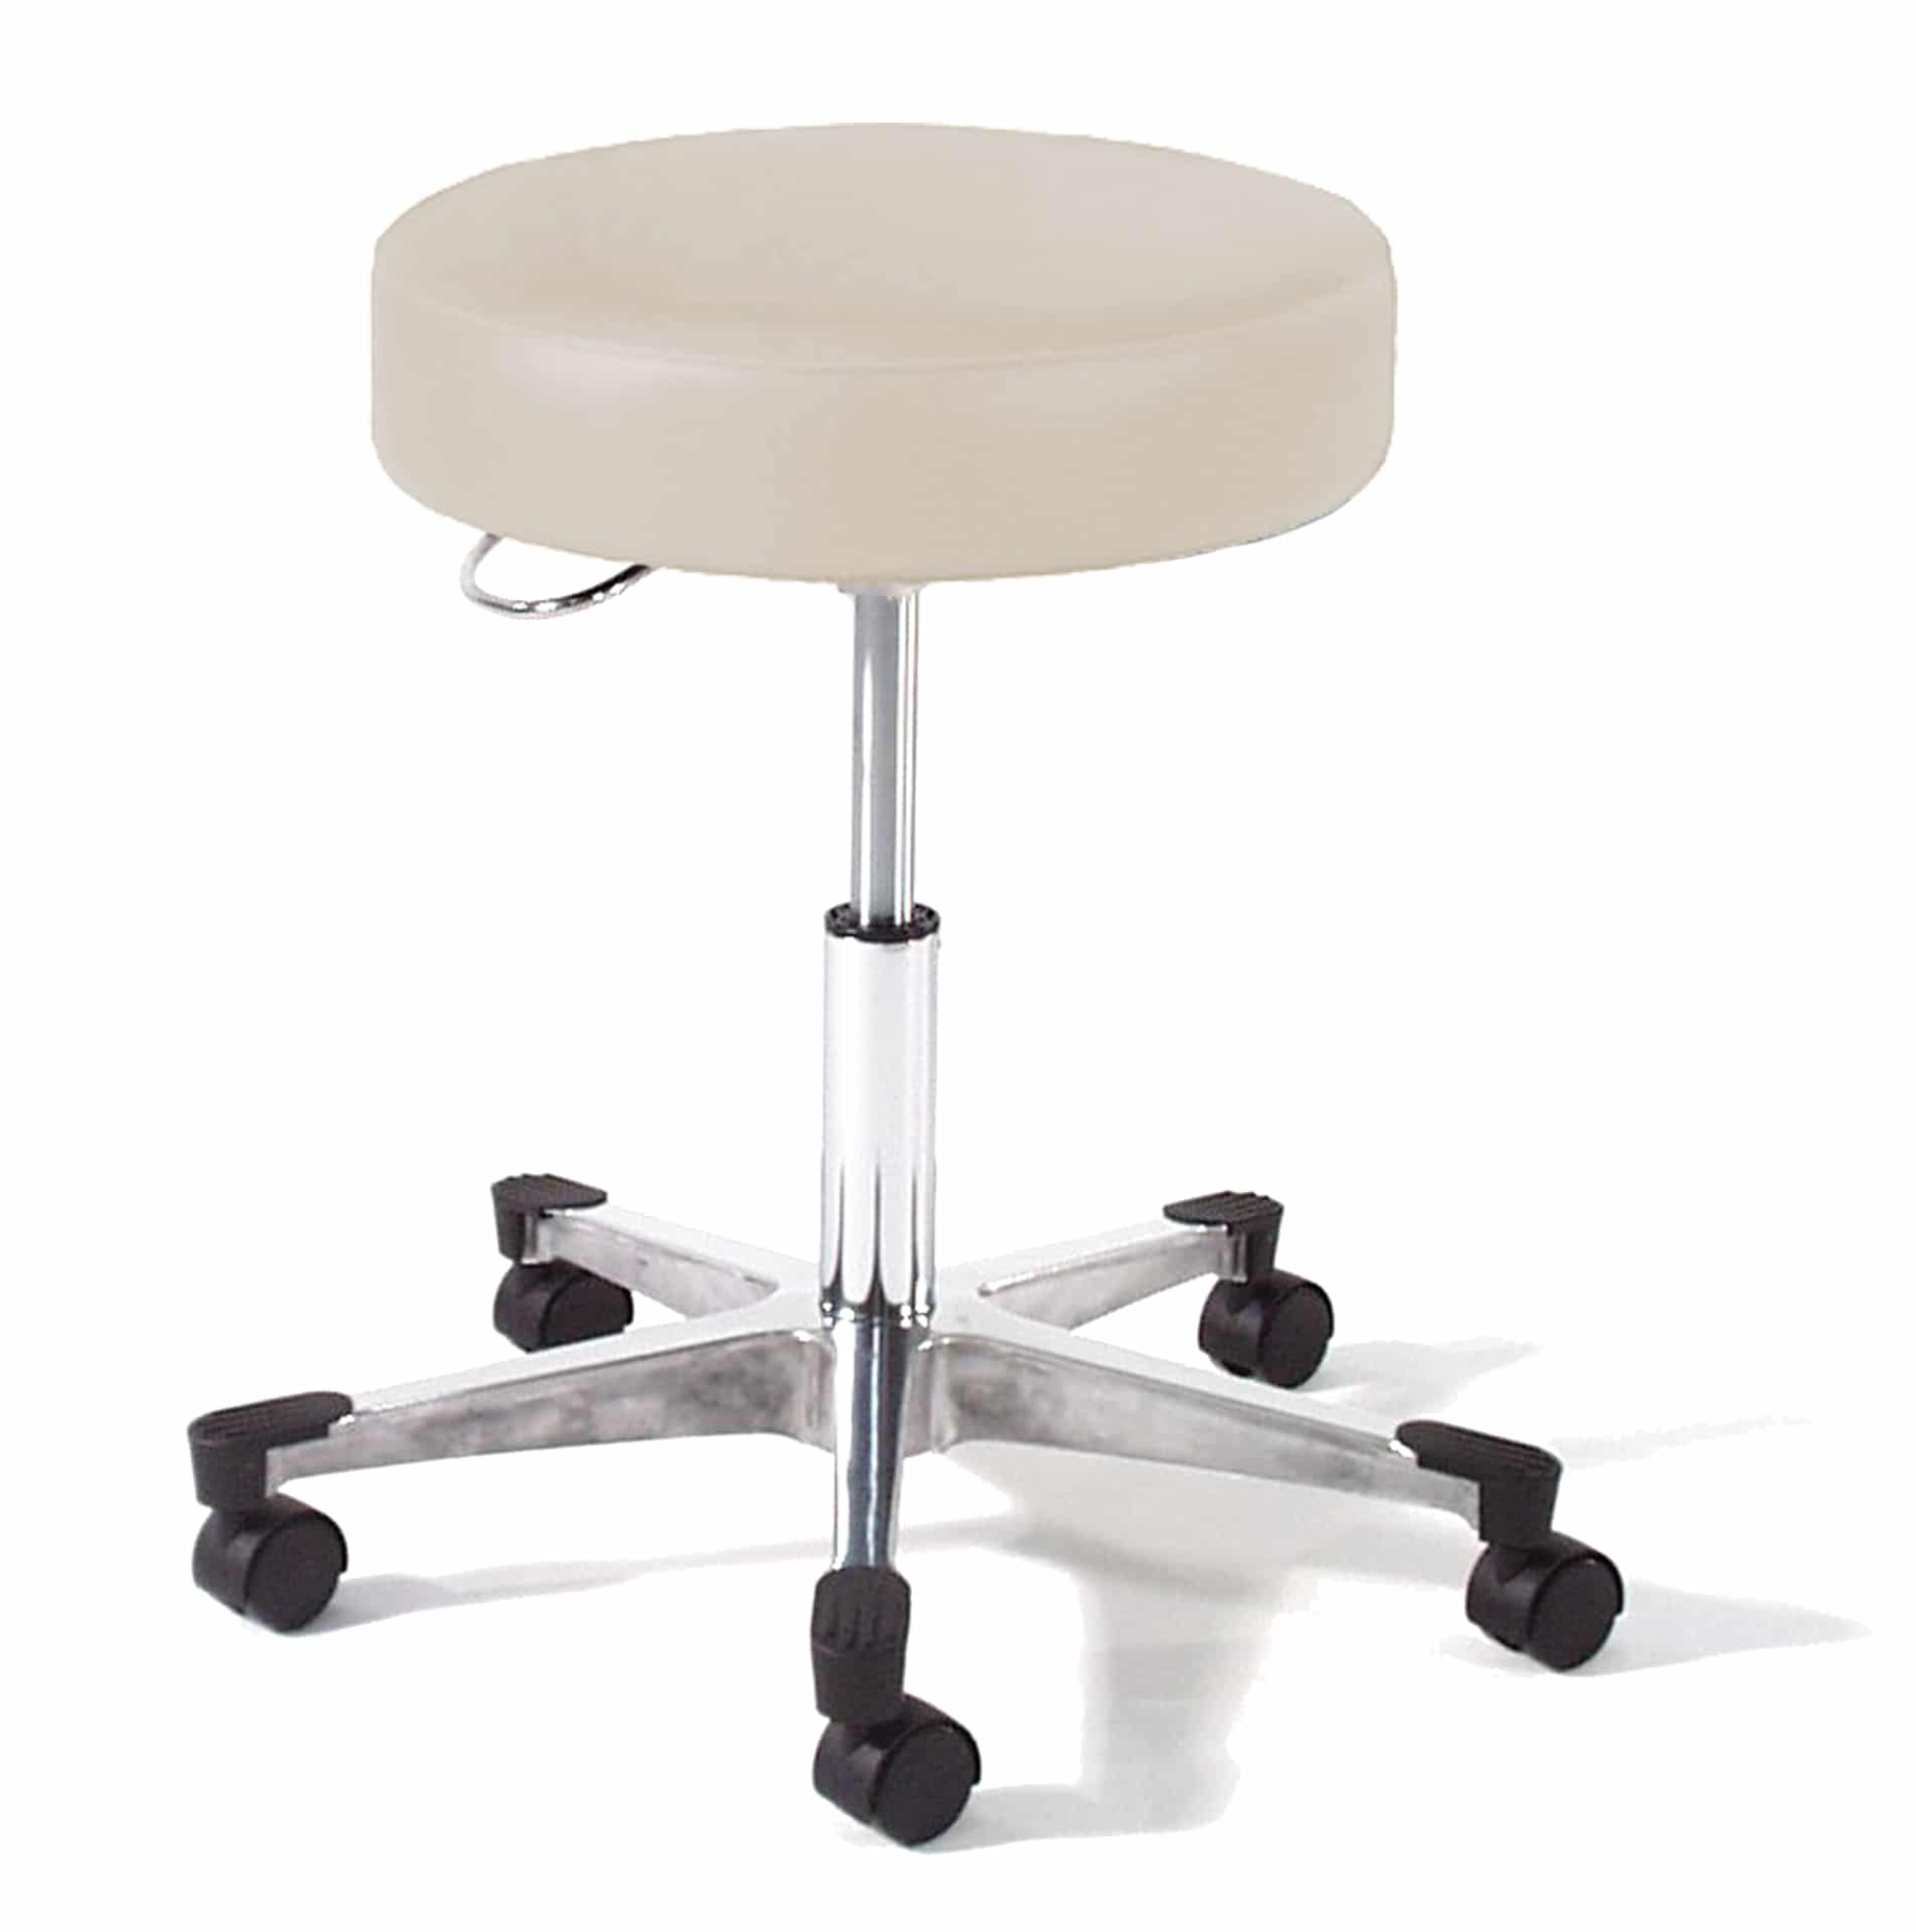 Swivel Stools Products, Supplies and Equipment